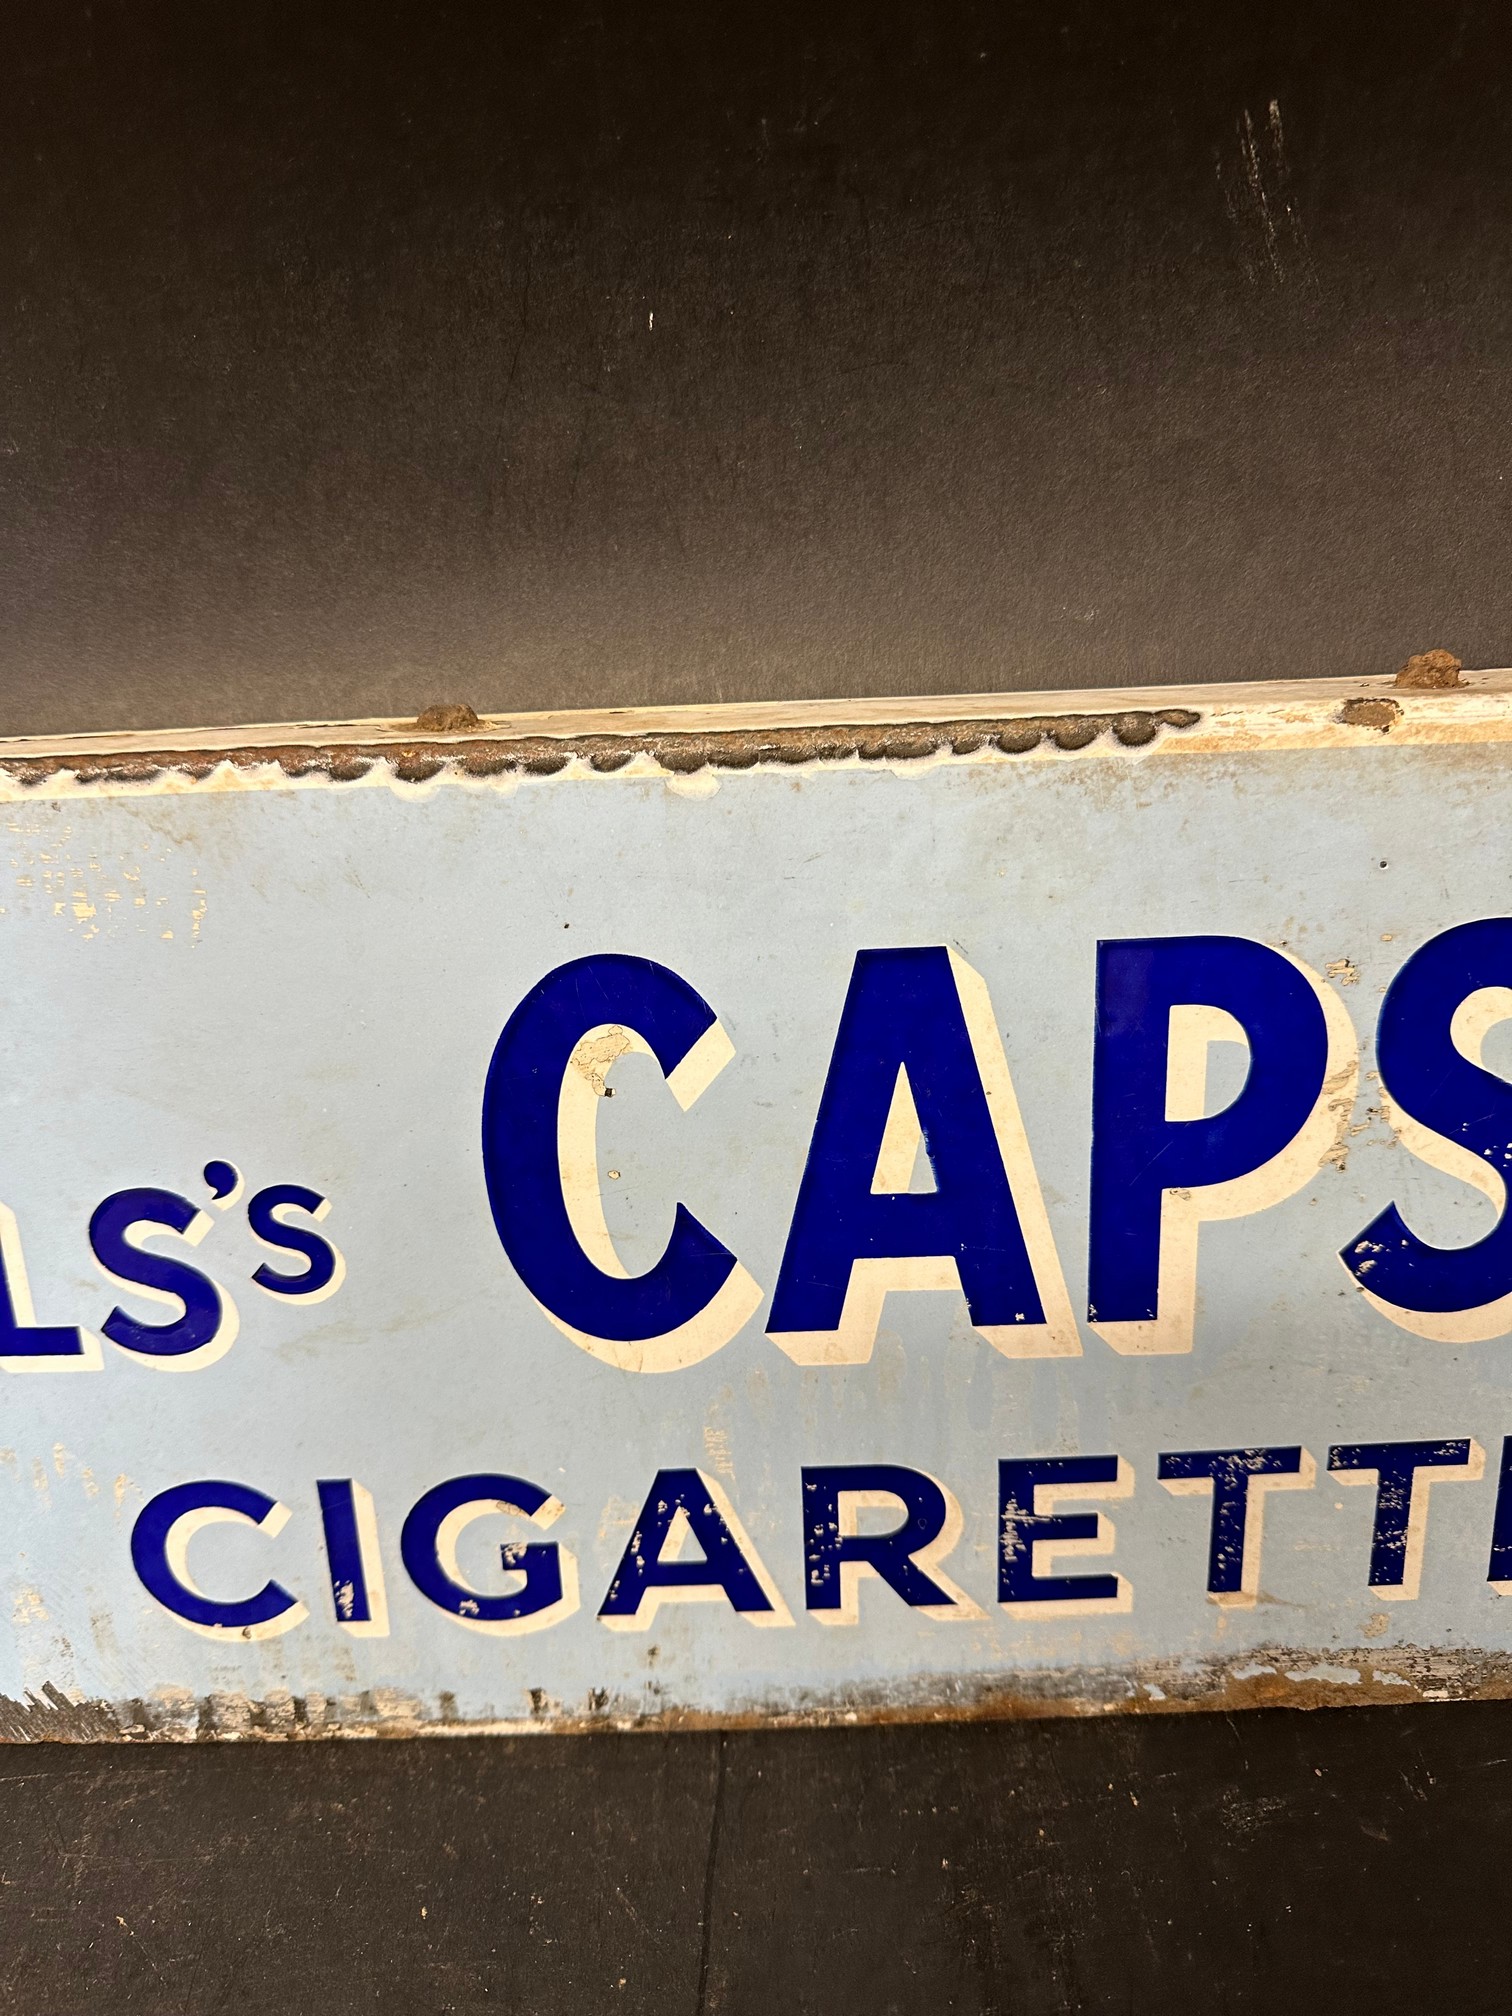 A Wills's Capstan Cigarettes double sided enamel advertising sign, unusually with hanging flange - Bild 3 aus 5